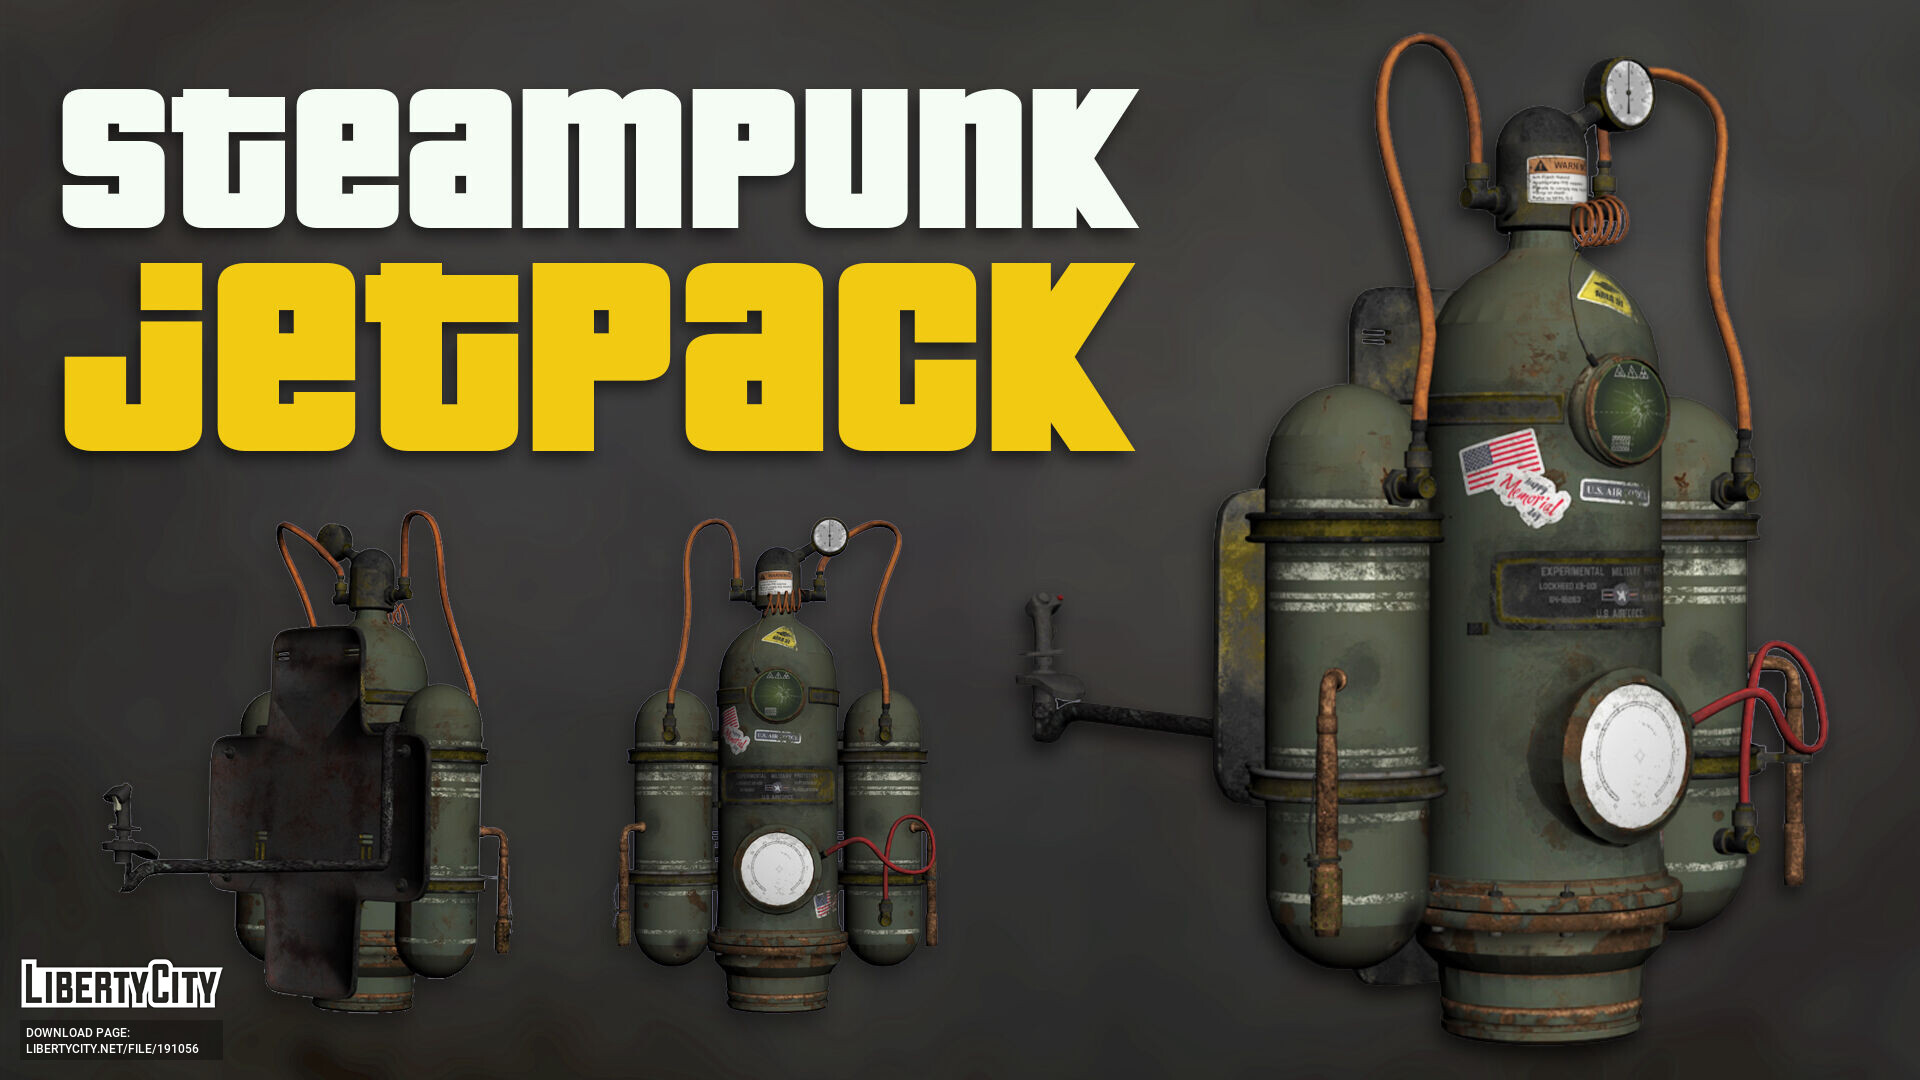 PC / Computer - Grand Theft Auto: San Andreas - Jetpack - The Models  Resource